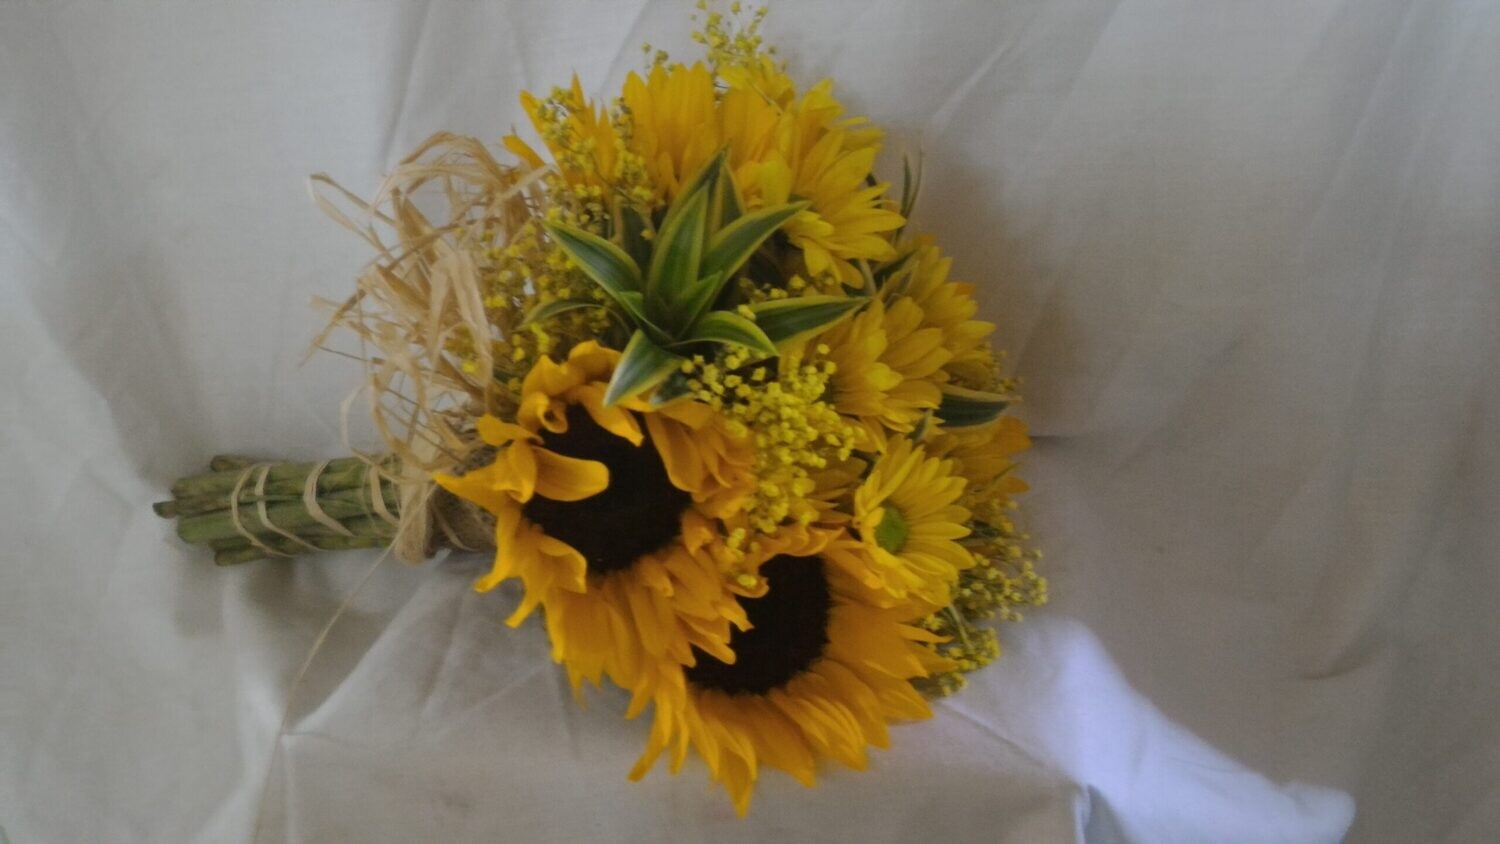 Mix cut flowers with Sun flower